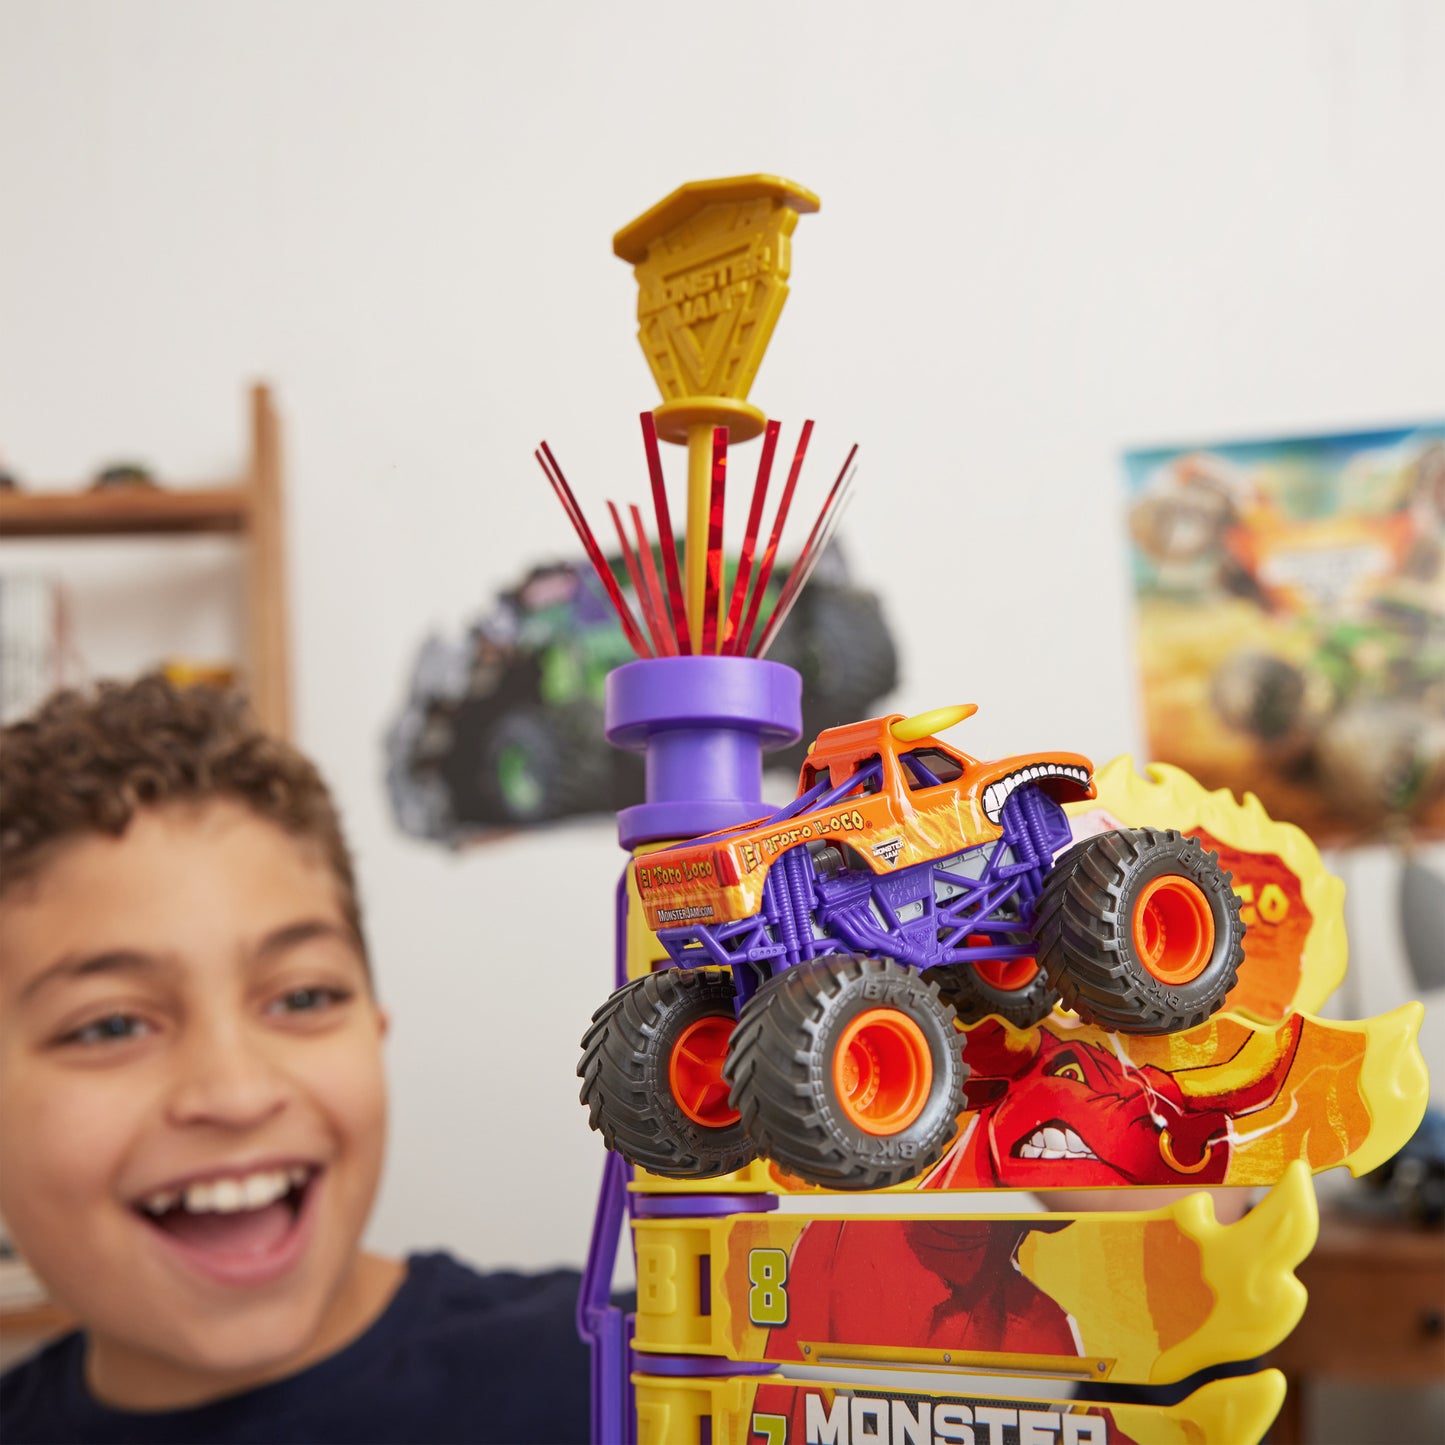 Monster Jam El Toro Loco Big Air Challenge, Over 20-Inch Tall Playset with Exclusive Monster Truck Toy, 1:64 Scale, Kids Toys for Boys Ages 3 and up